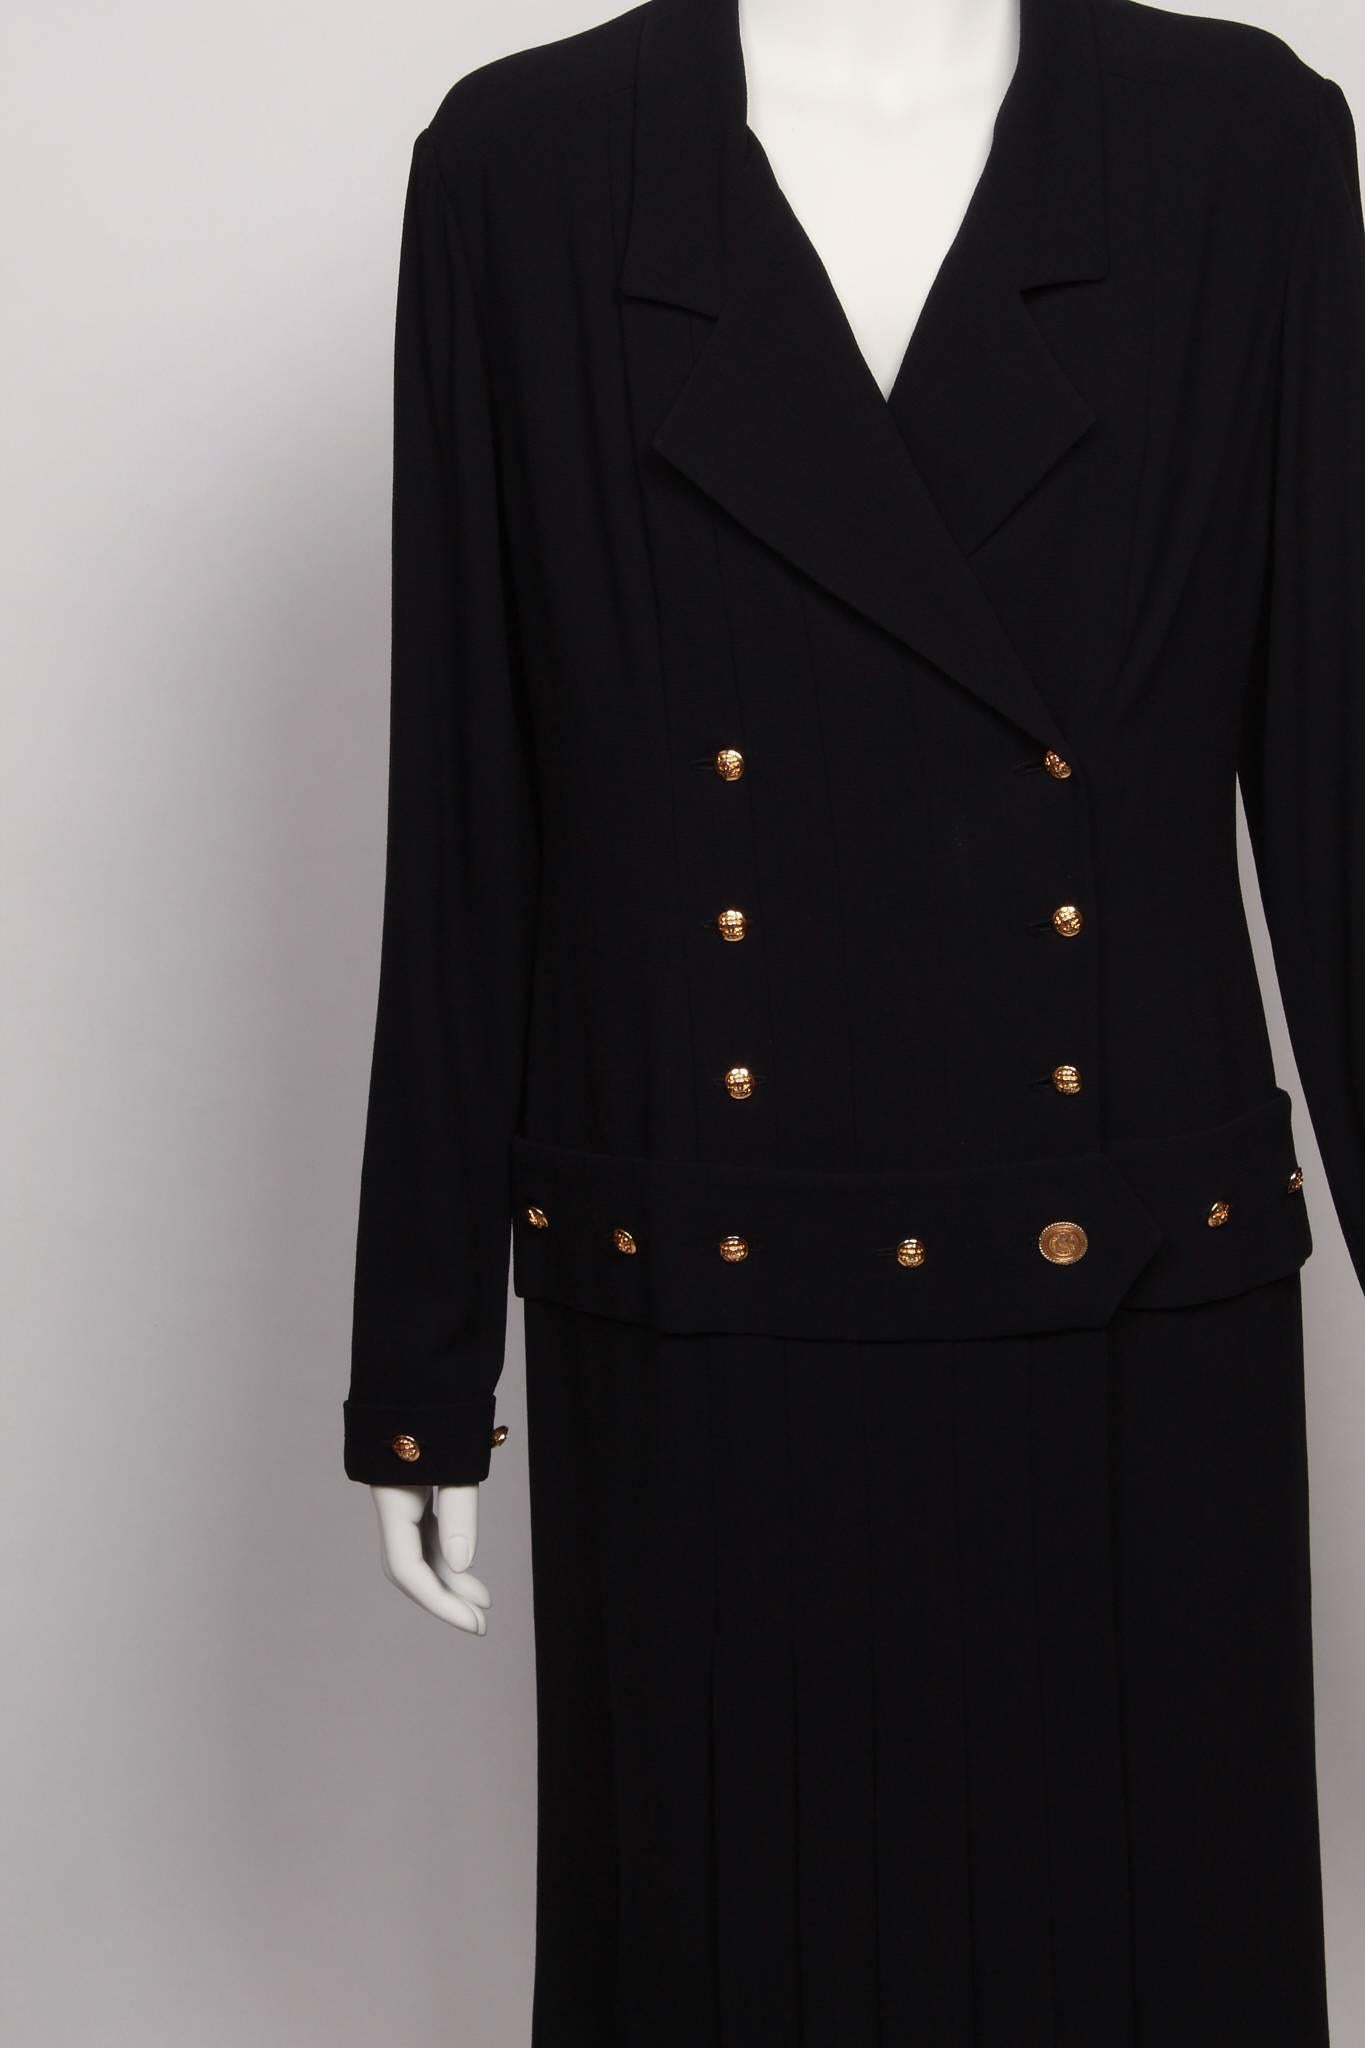 Chanel Flapper Dress In Good Condition For Sale In Melbourne, Victoria